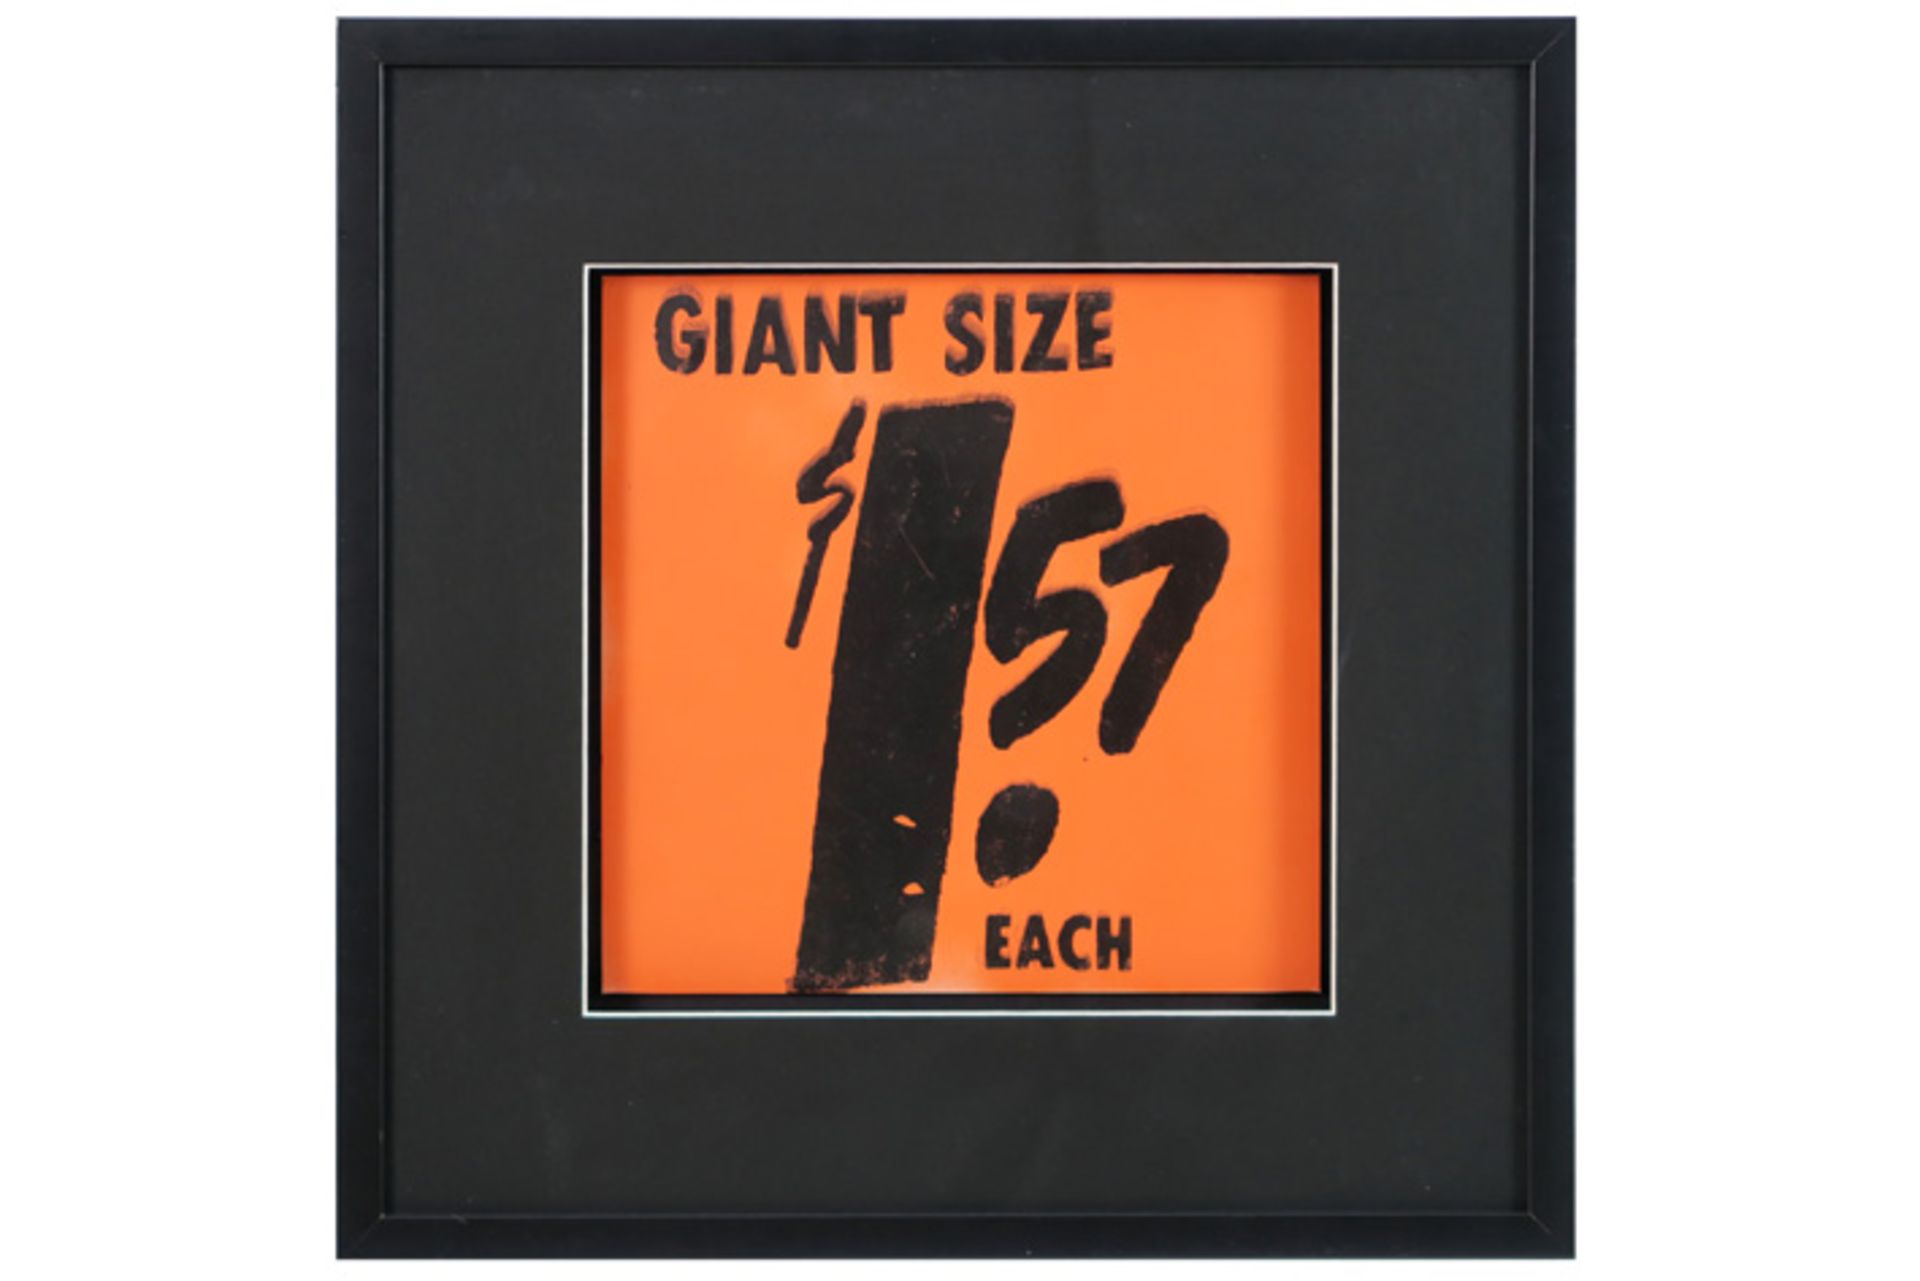 rare Andy Warhol screenprint on the cover of "Giant Size $1.57 each" (orange version) dd 1971|| - Image 2 of 2